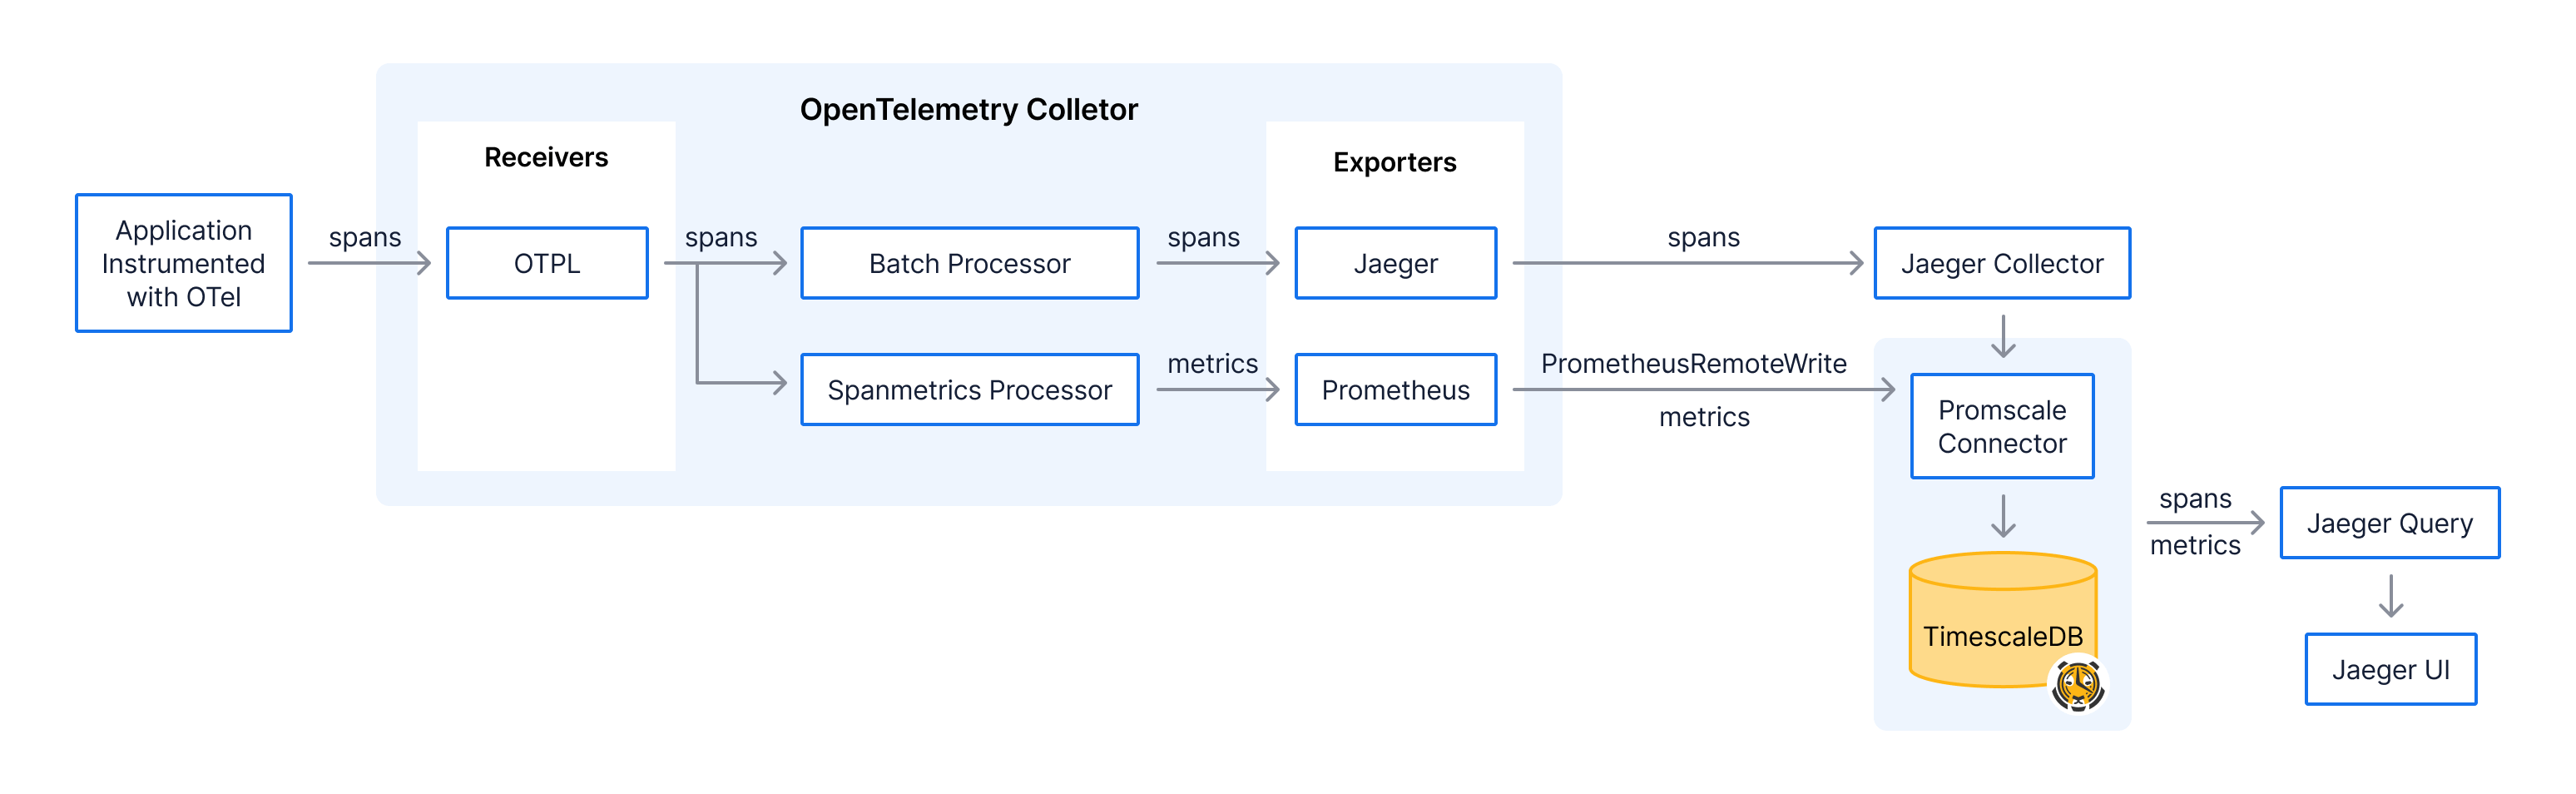 Architecture diagram of how Jaeger tracing works with OpenTelemetry and Promscale